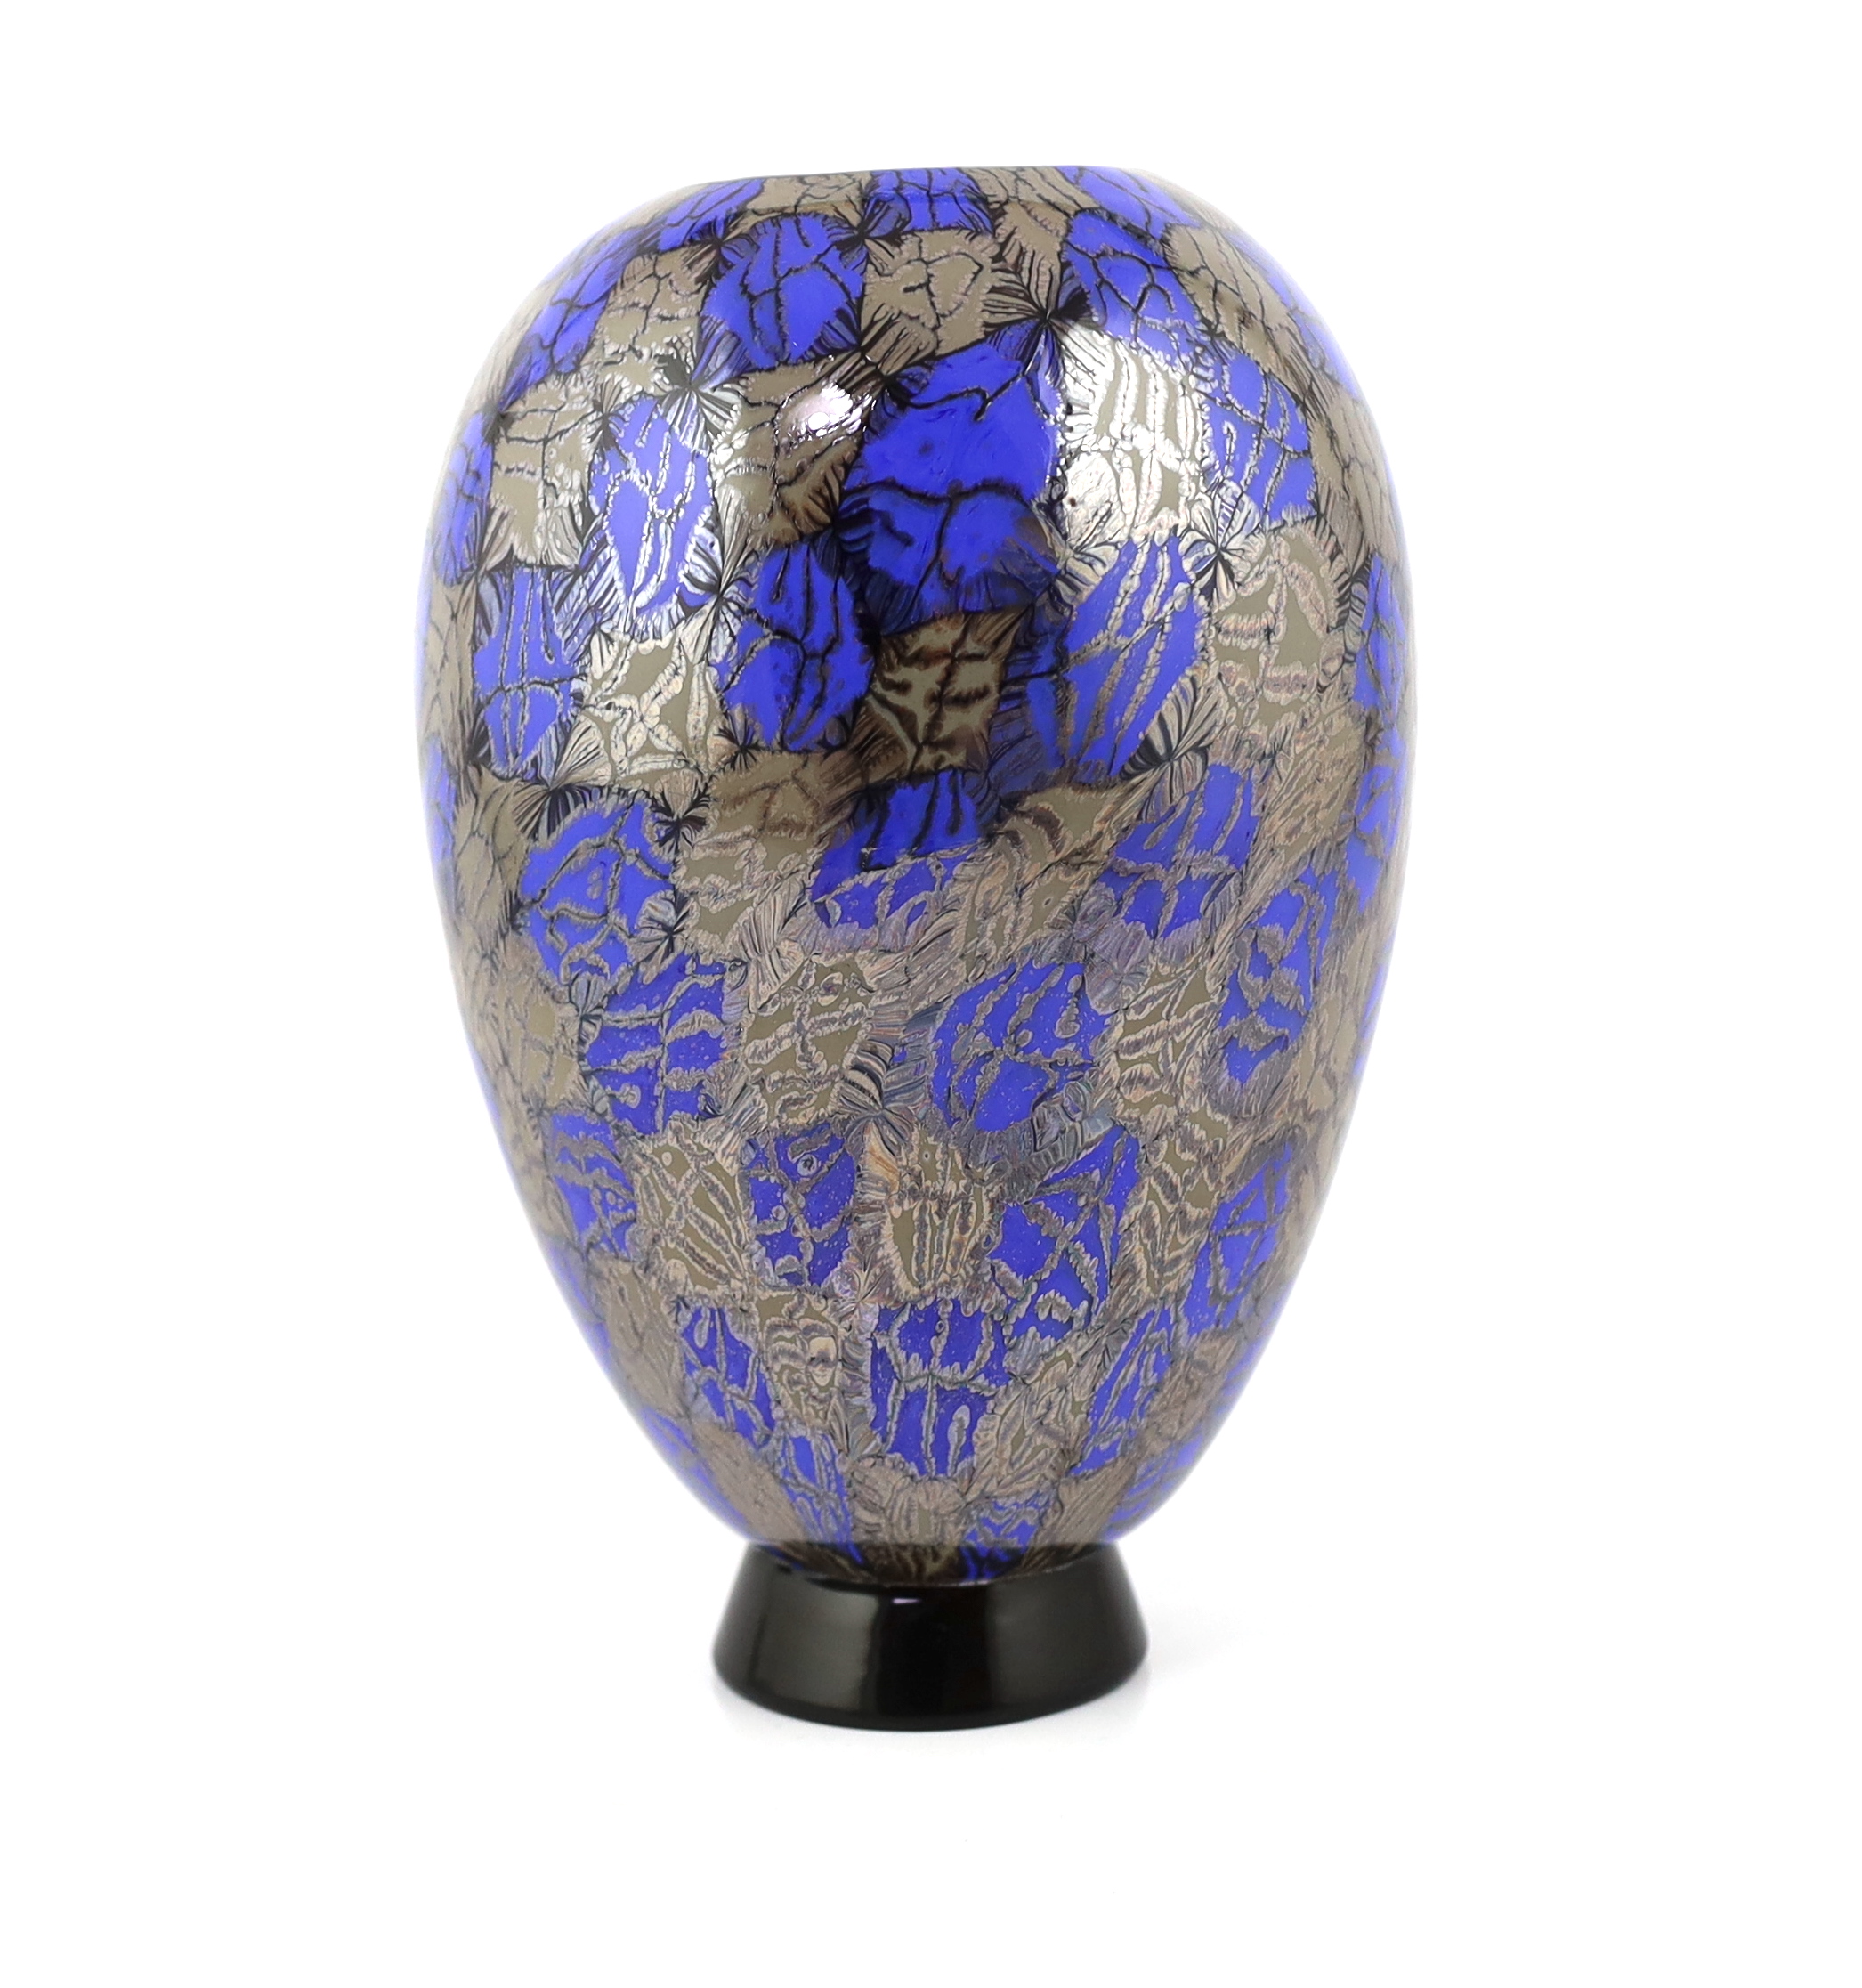 Vittorio Ferro (1932-2012) for Fratelli Pagnin. A Murano glass Murrine vase, in blue and grey, signed, 24cm, Please note this lot attracts an additional import tax of 20% on the hammer price